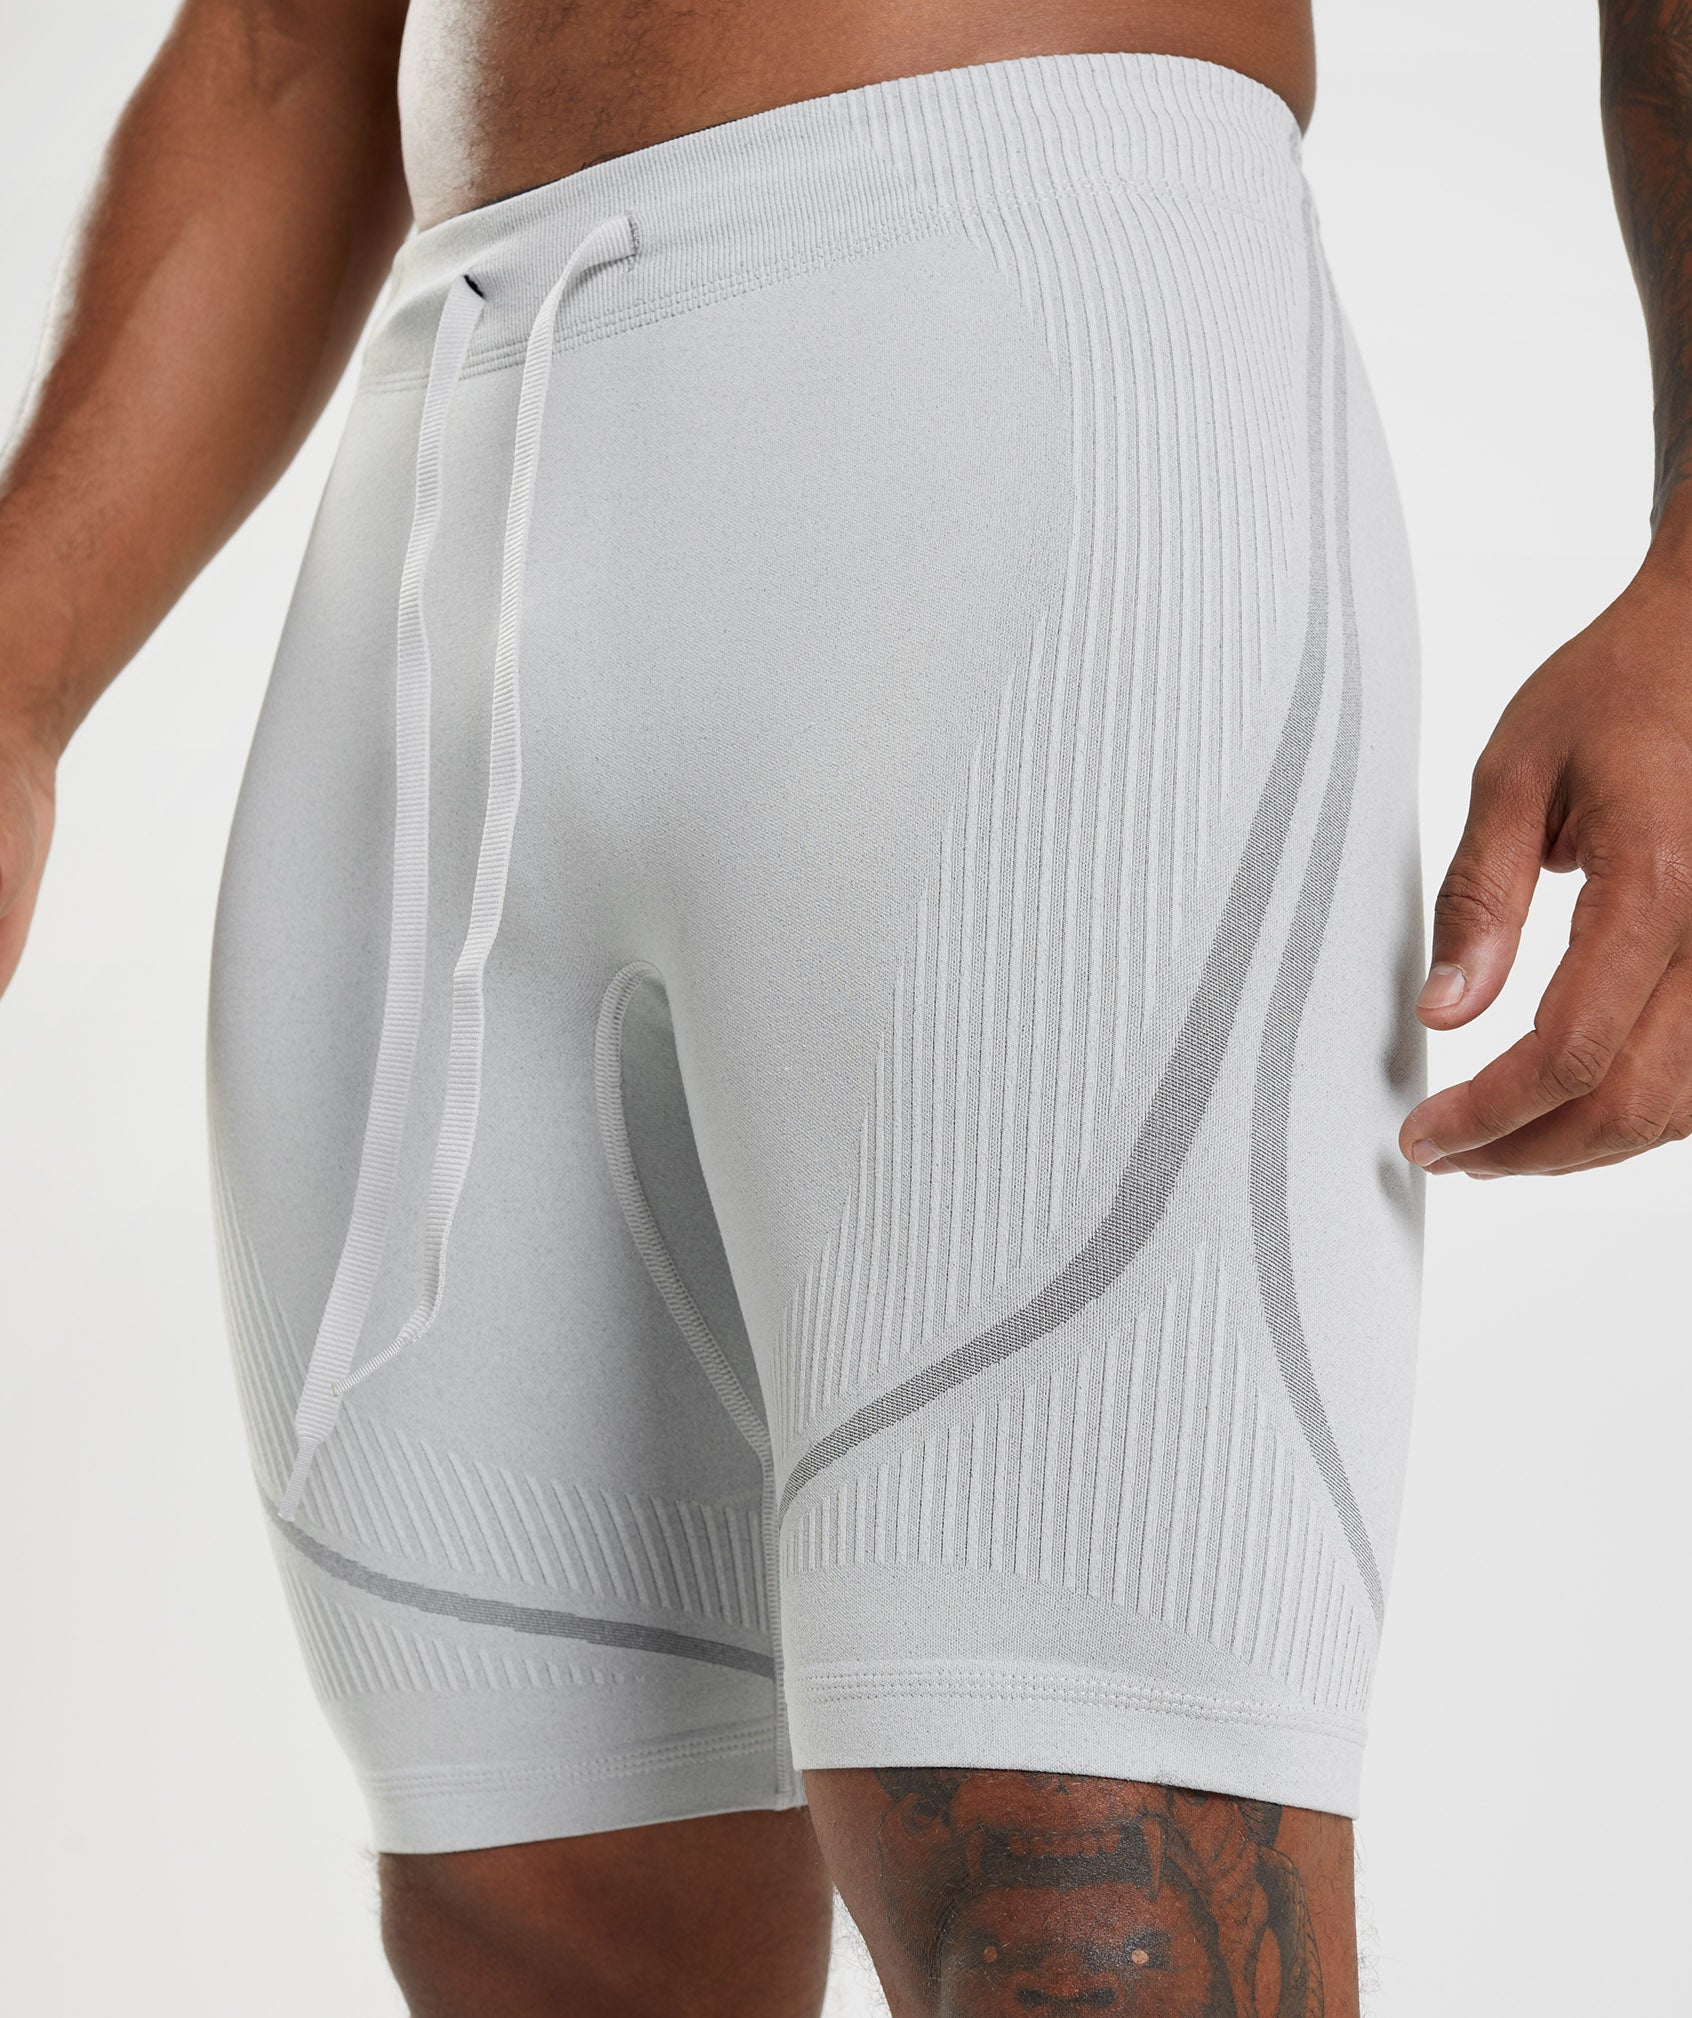 315 Seamless 1/2 Shorts in Light Grey/Charcoal Grey - view 6